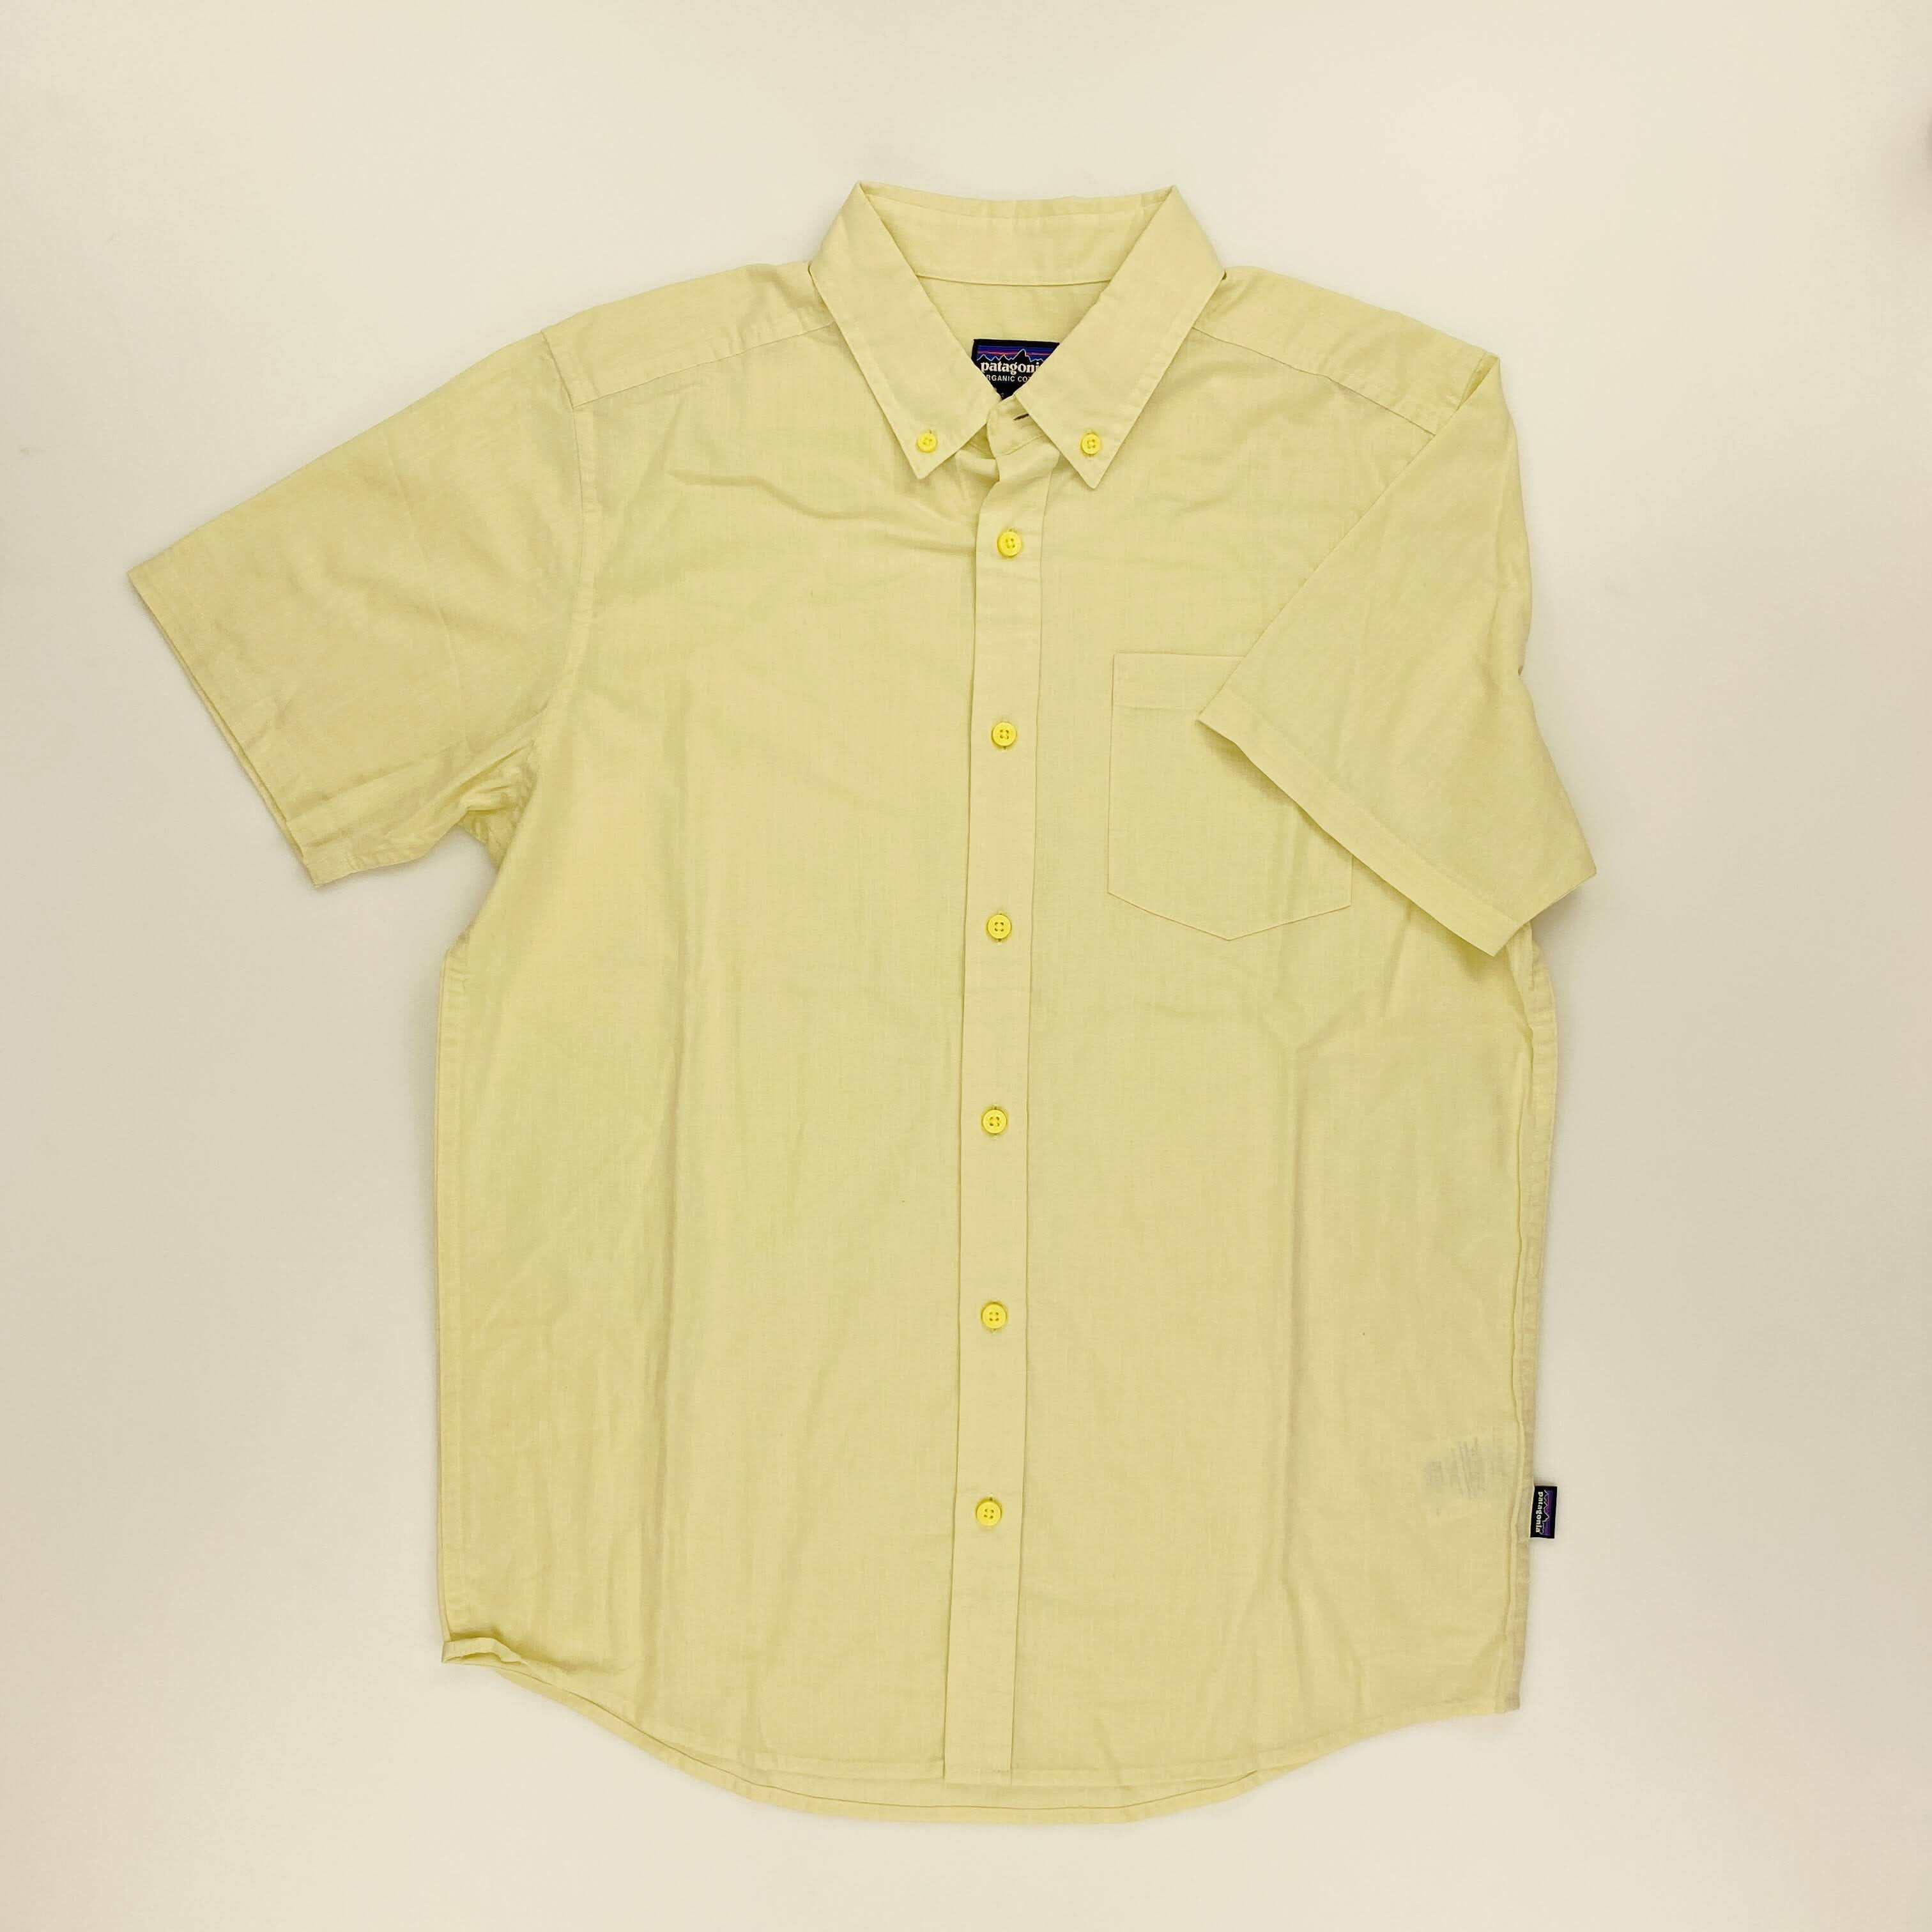 Patagonia M's LW Bluffside Shirt - Seconde main Chemise homme - Jaune - M | Hardloop